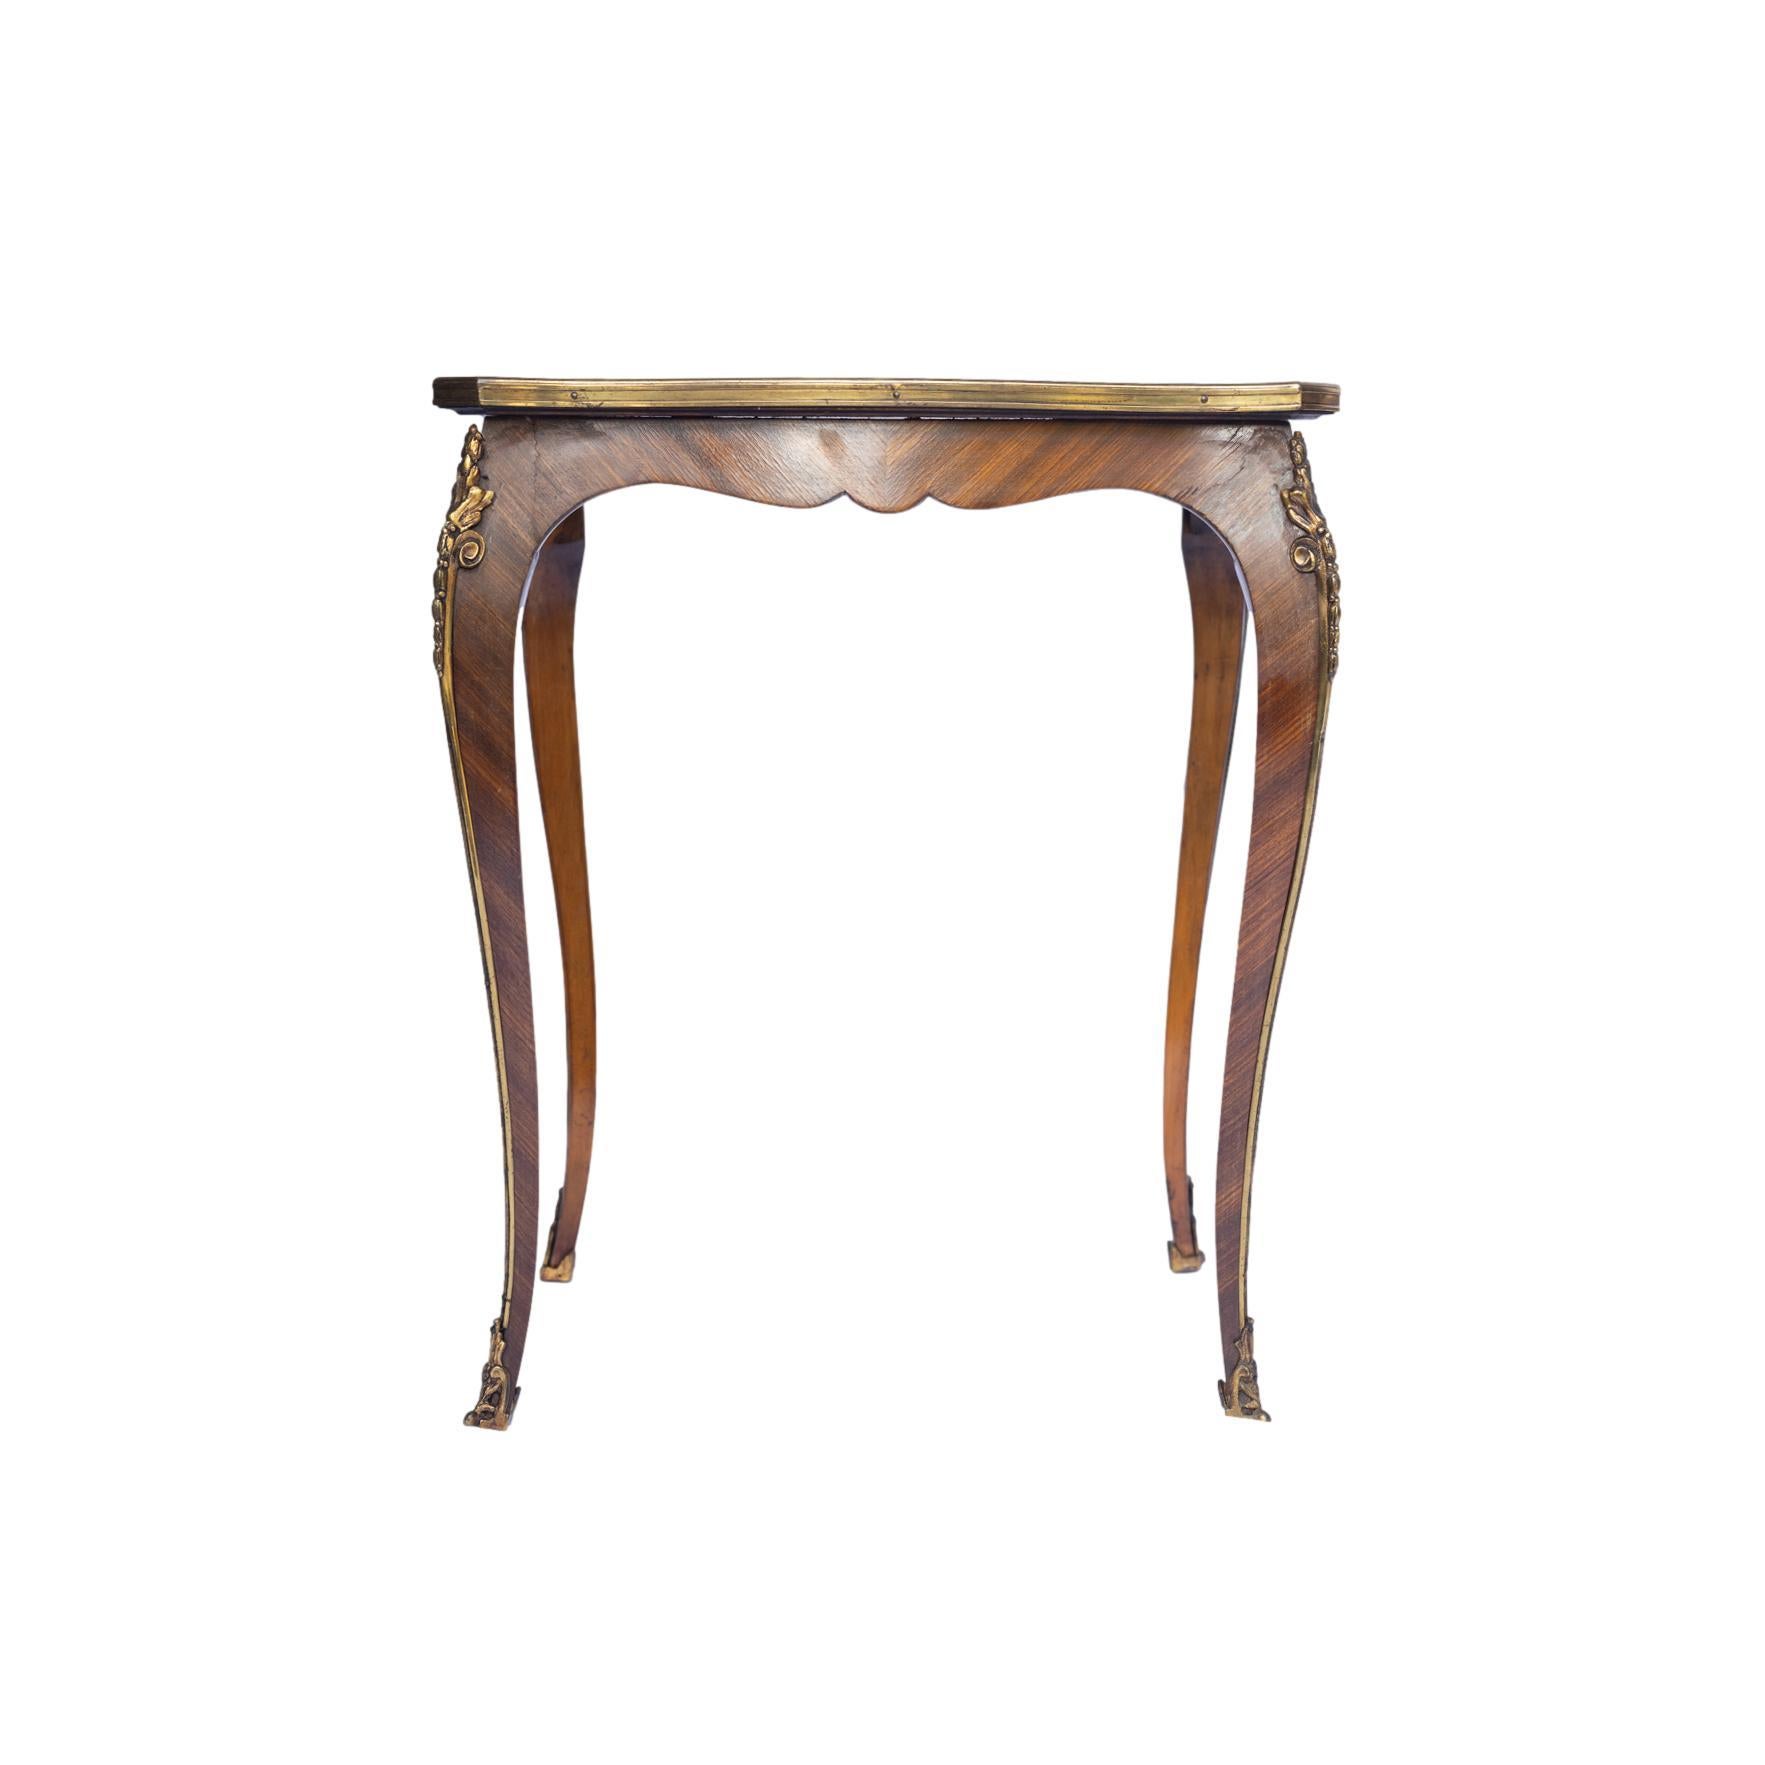 Set Three Louis XV-Style Kingwood and Parquetry Nesting Tables, French, c. 1880 For Sale 1